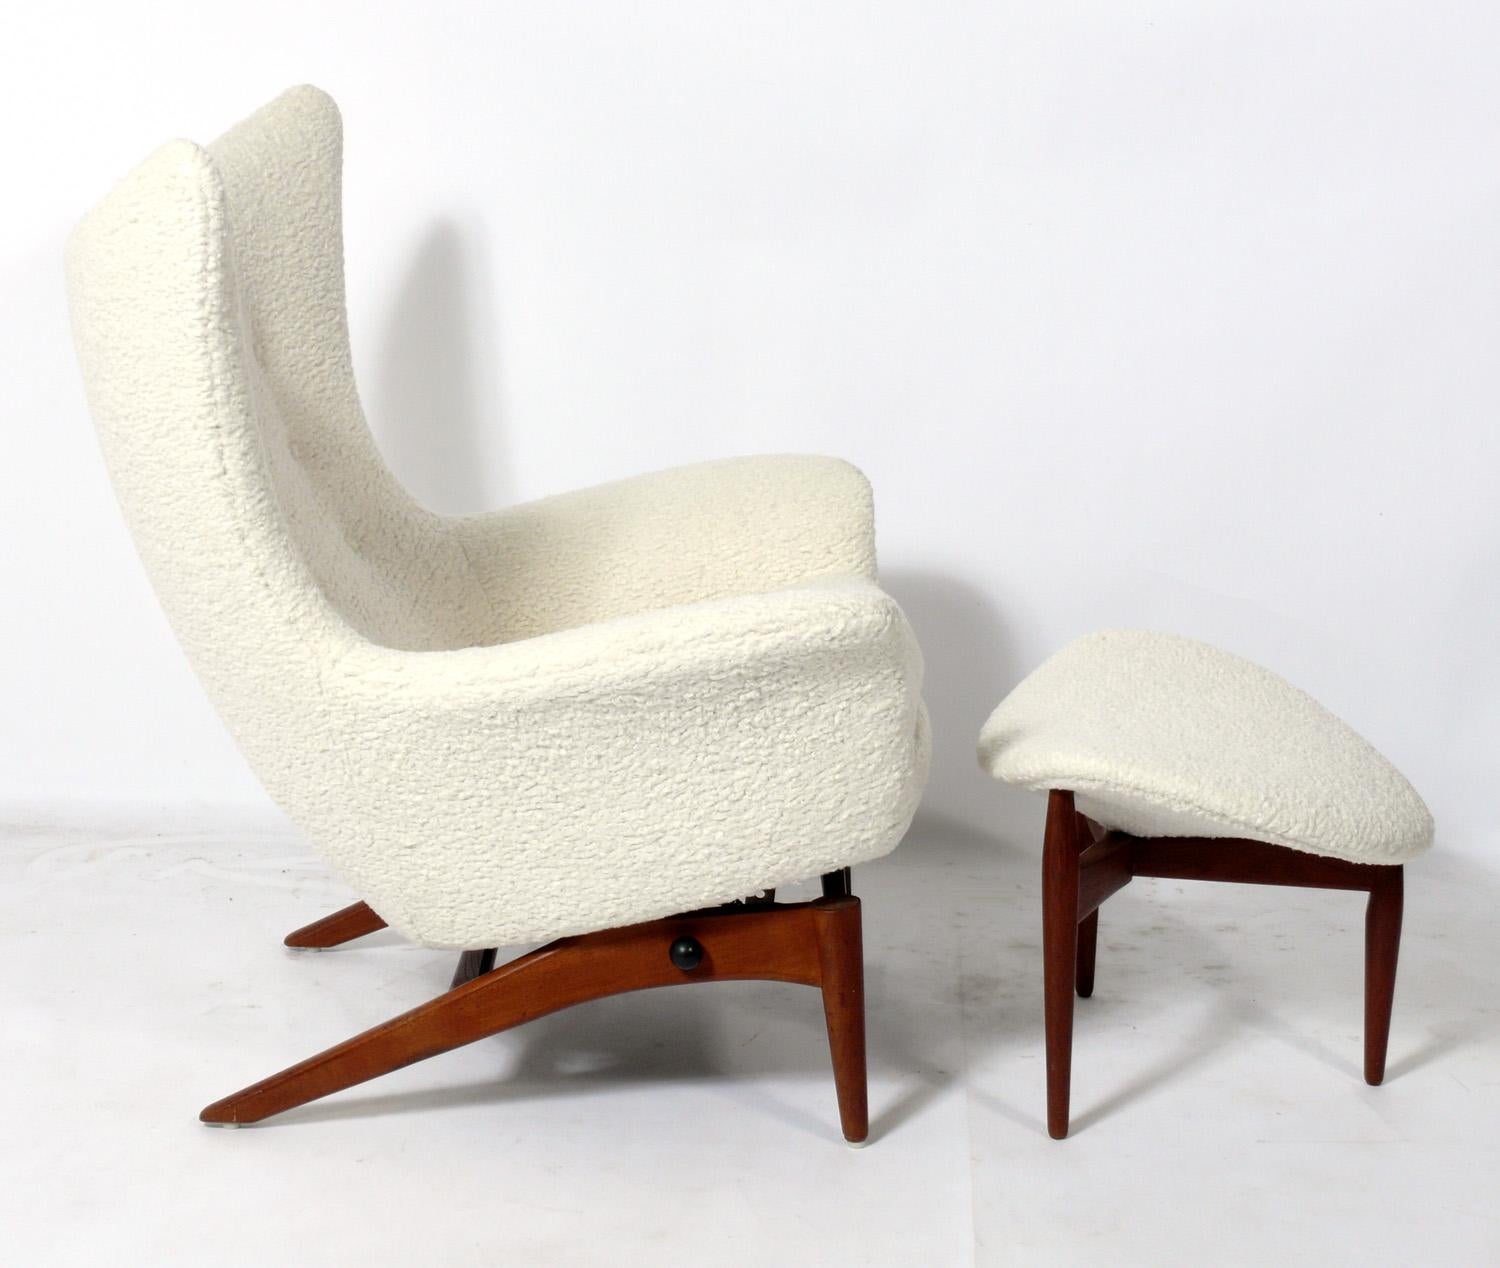 Sculptural Danish modern lounge chair and ottoman, designed by H.W. Klein for Bramin Mobler, Denmark, circa 1960s. The chair reclines with an adjustable handle on the side. It has been reupholstered in an ivory color faux shearling. All the plush